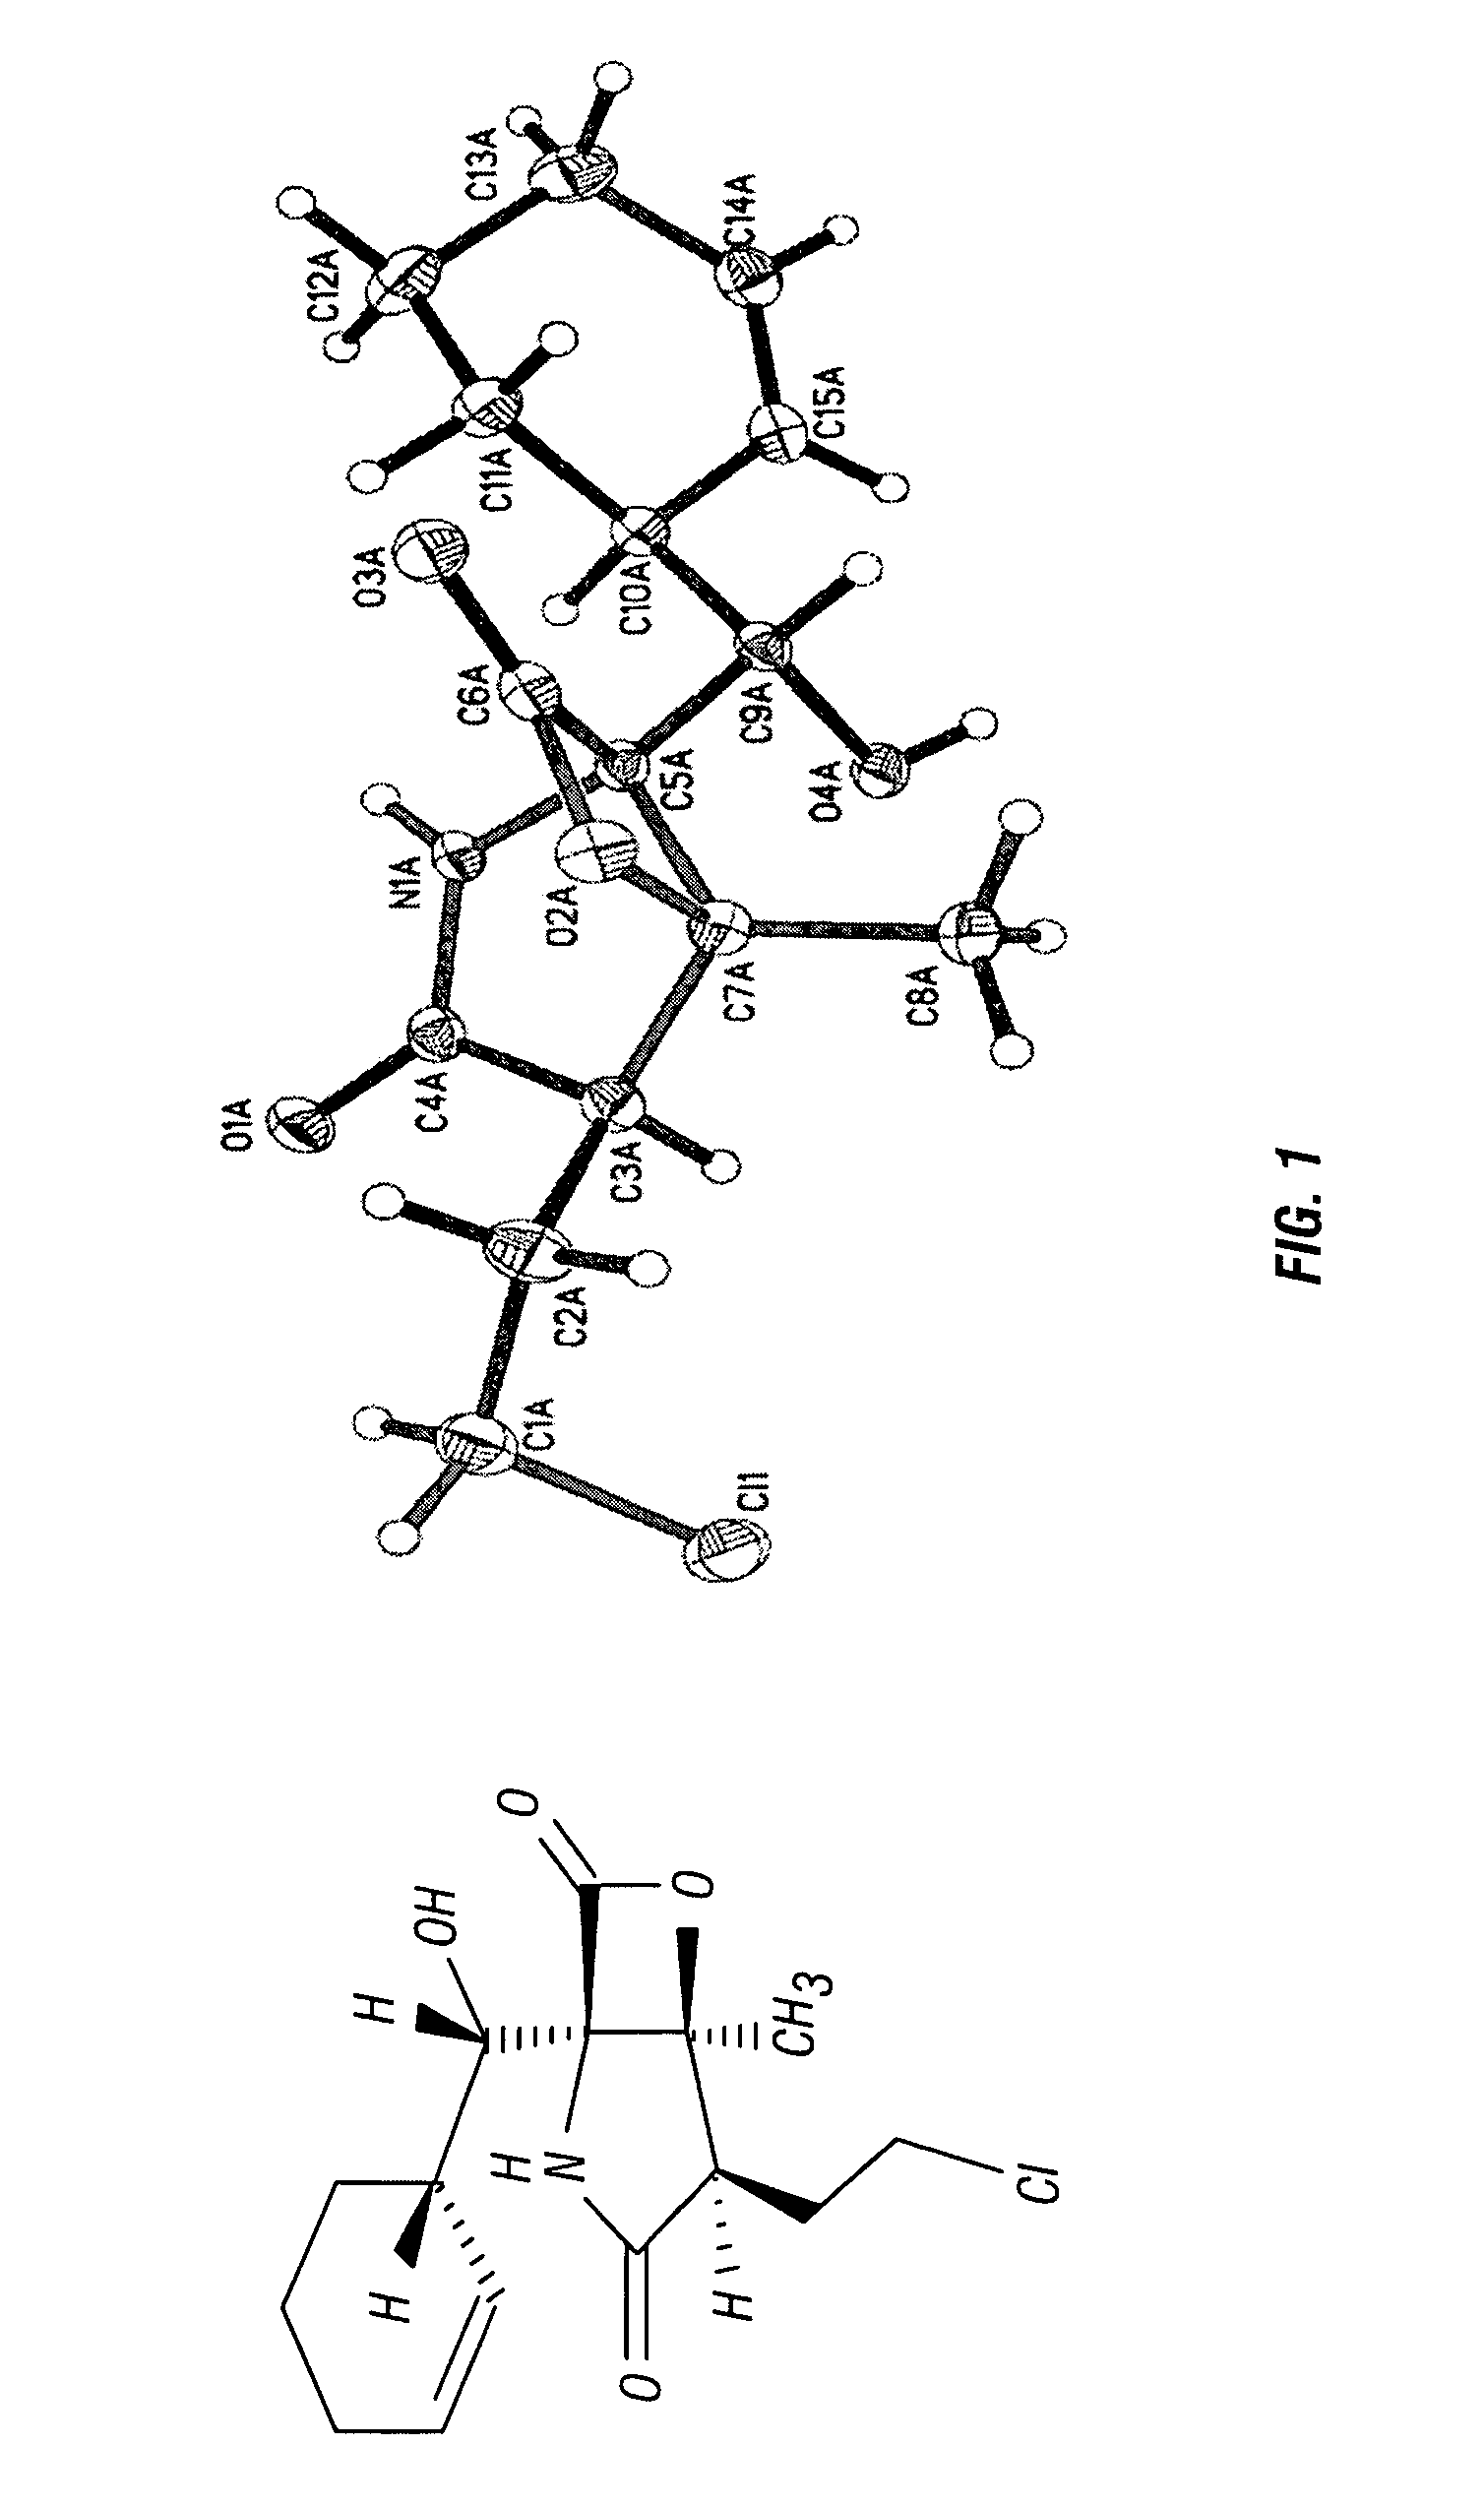 Methods of using [3.2.0] heterocyclic compounds and analogs thereof